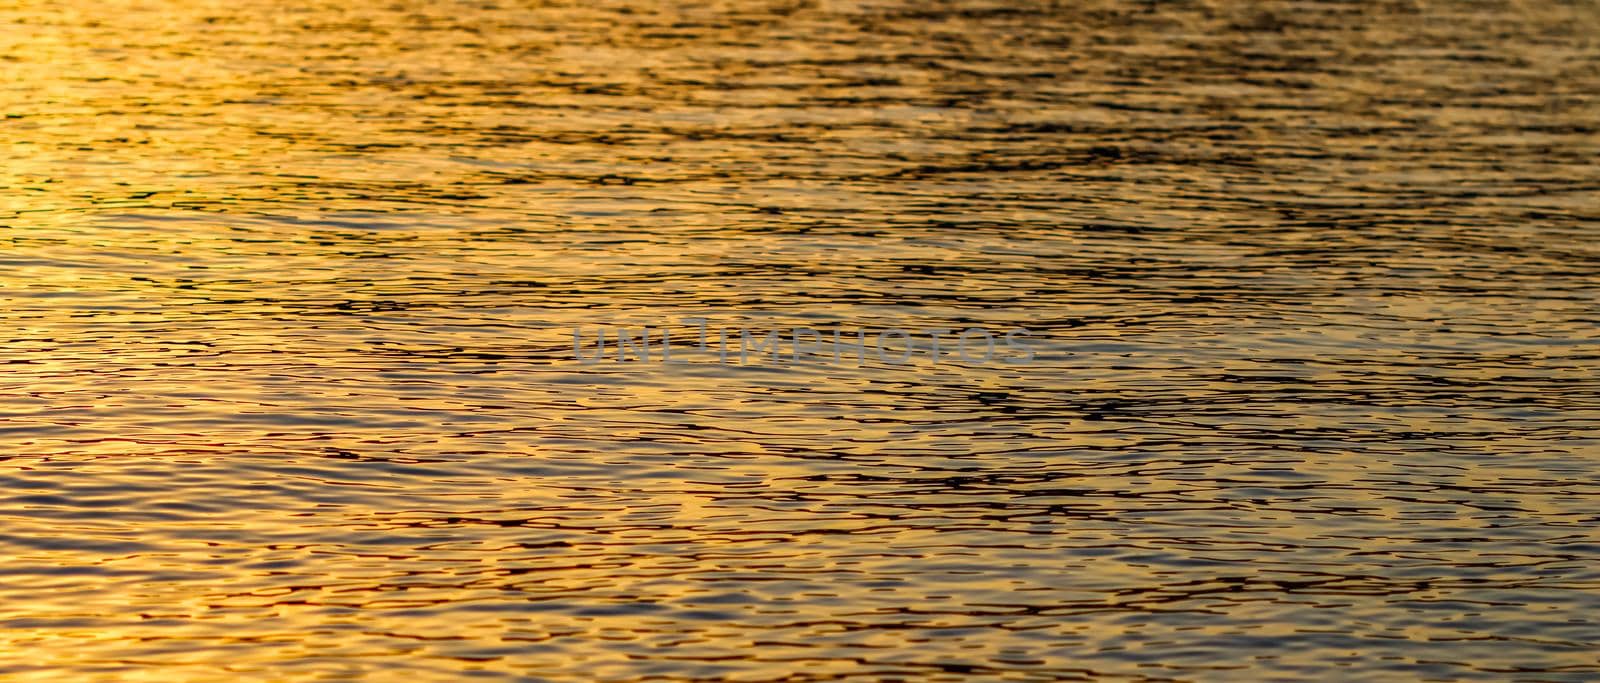 Golden sea waves in sunset glow as surface background. Summer holidays concept by Olayola